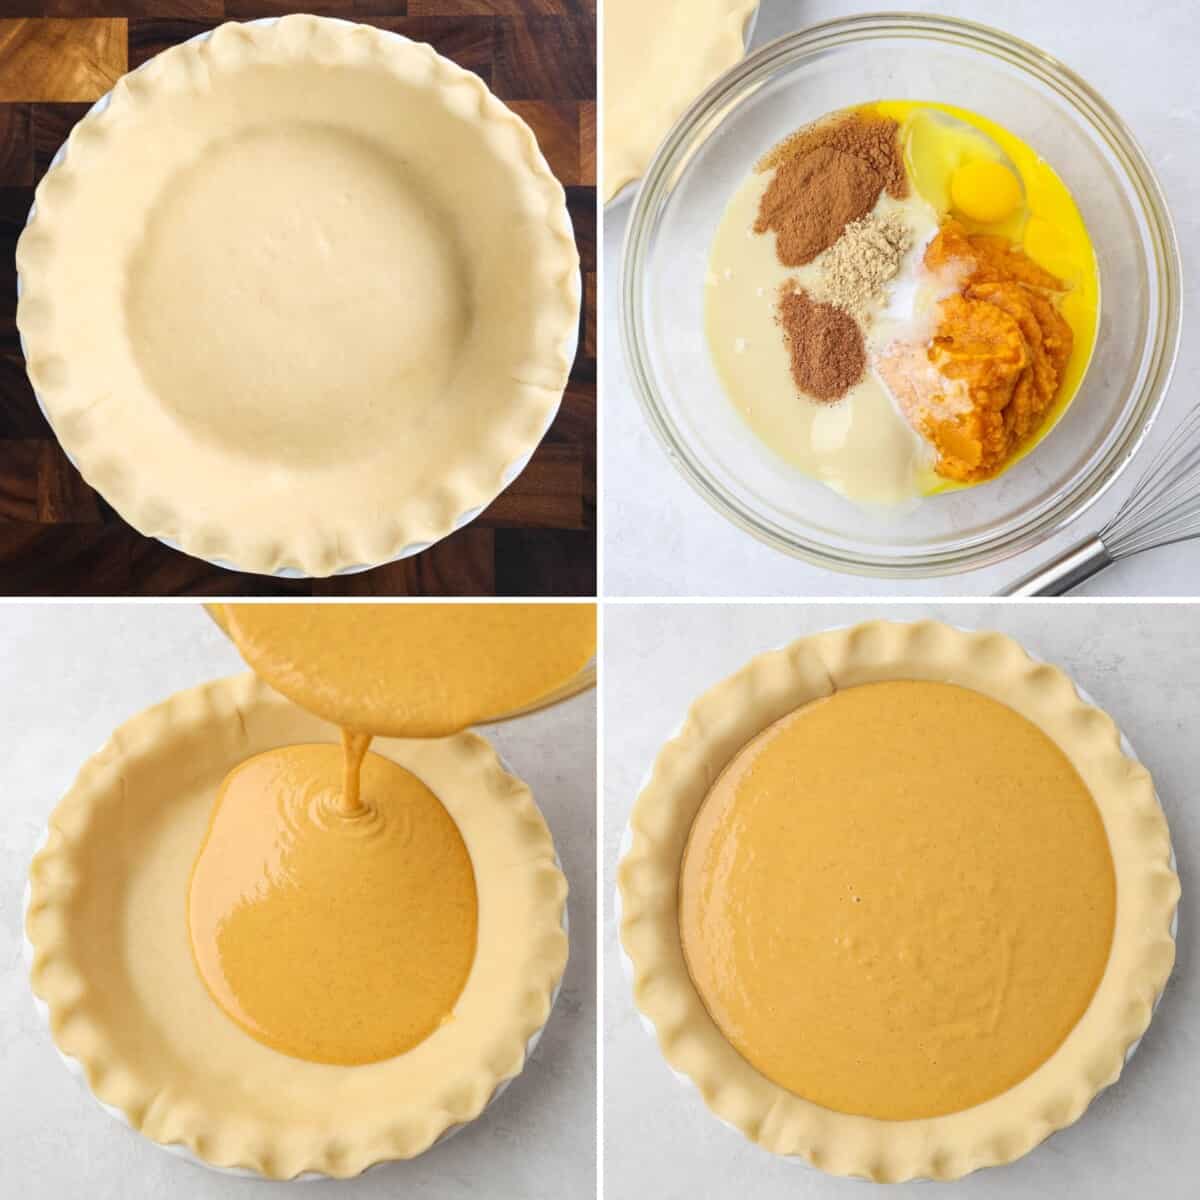 Photo collage of pumpkin pie making process with unbaked pie crust, raw ingredients in glass bowl, pouring pumpkin pie mixture into unbaked pie crust and a whole unbaked pumpkin pie.